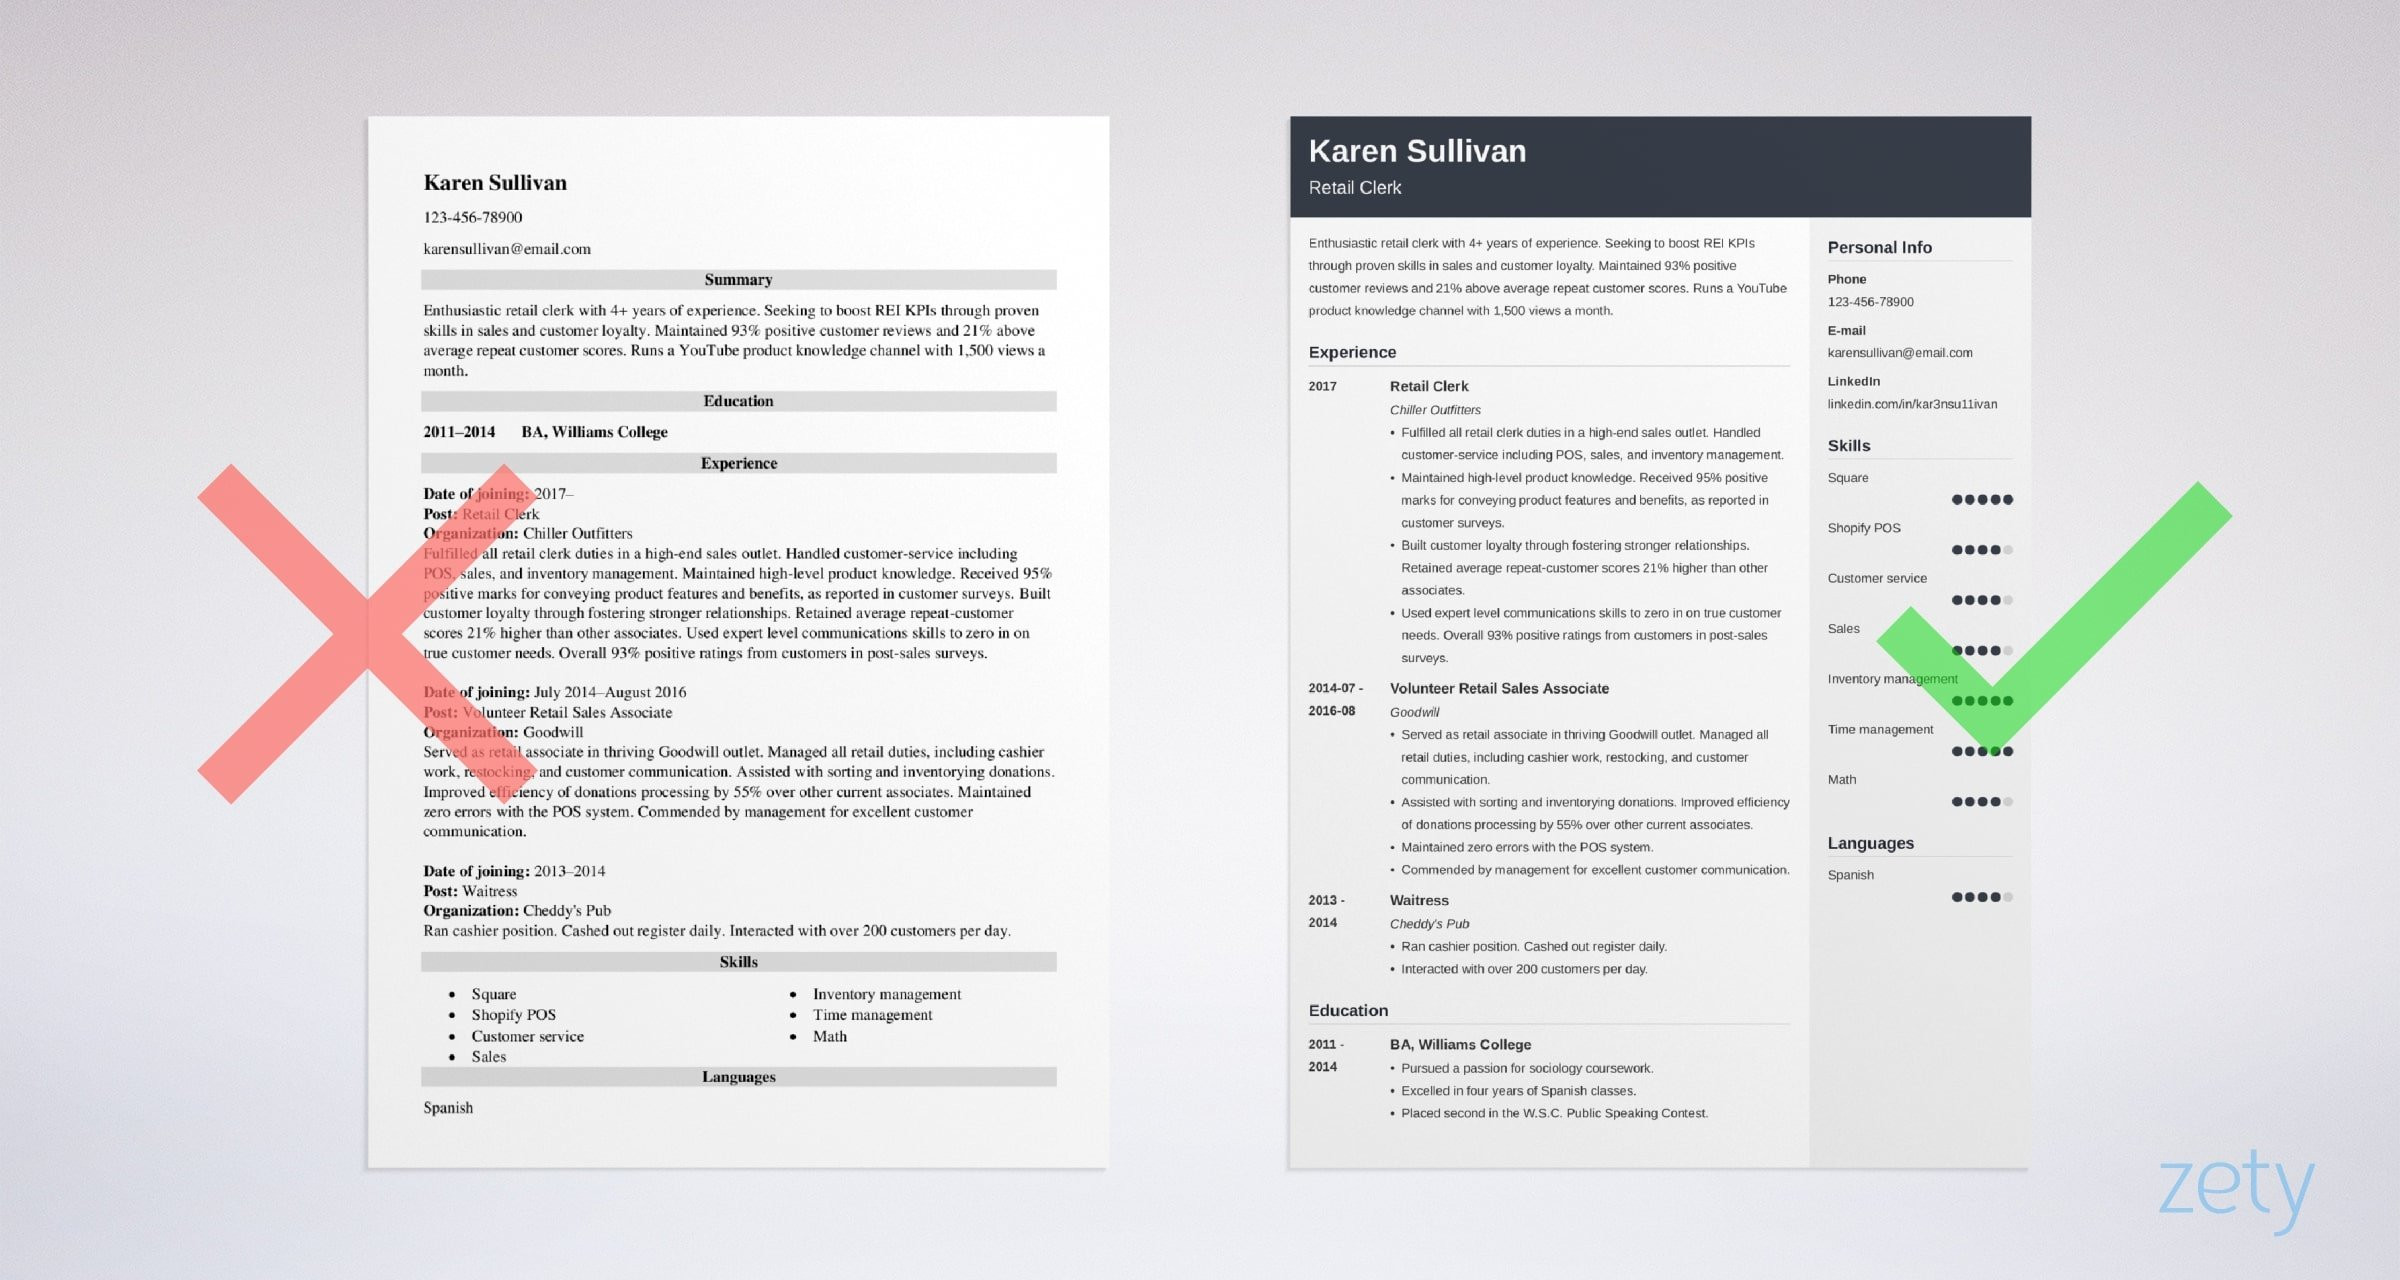 Professional Summary Resume Sample for Retail Retail Resume Examples (with Skills & Experience)